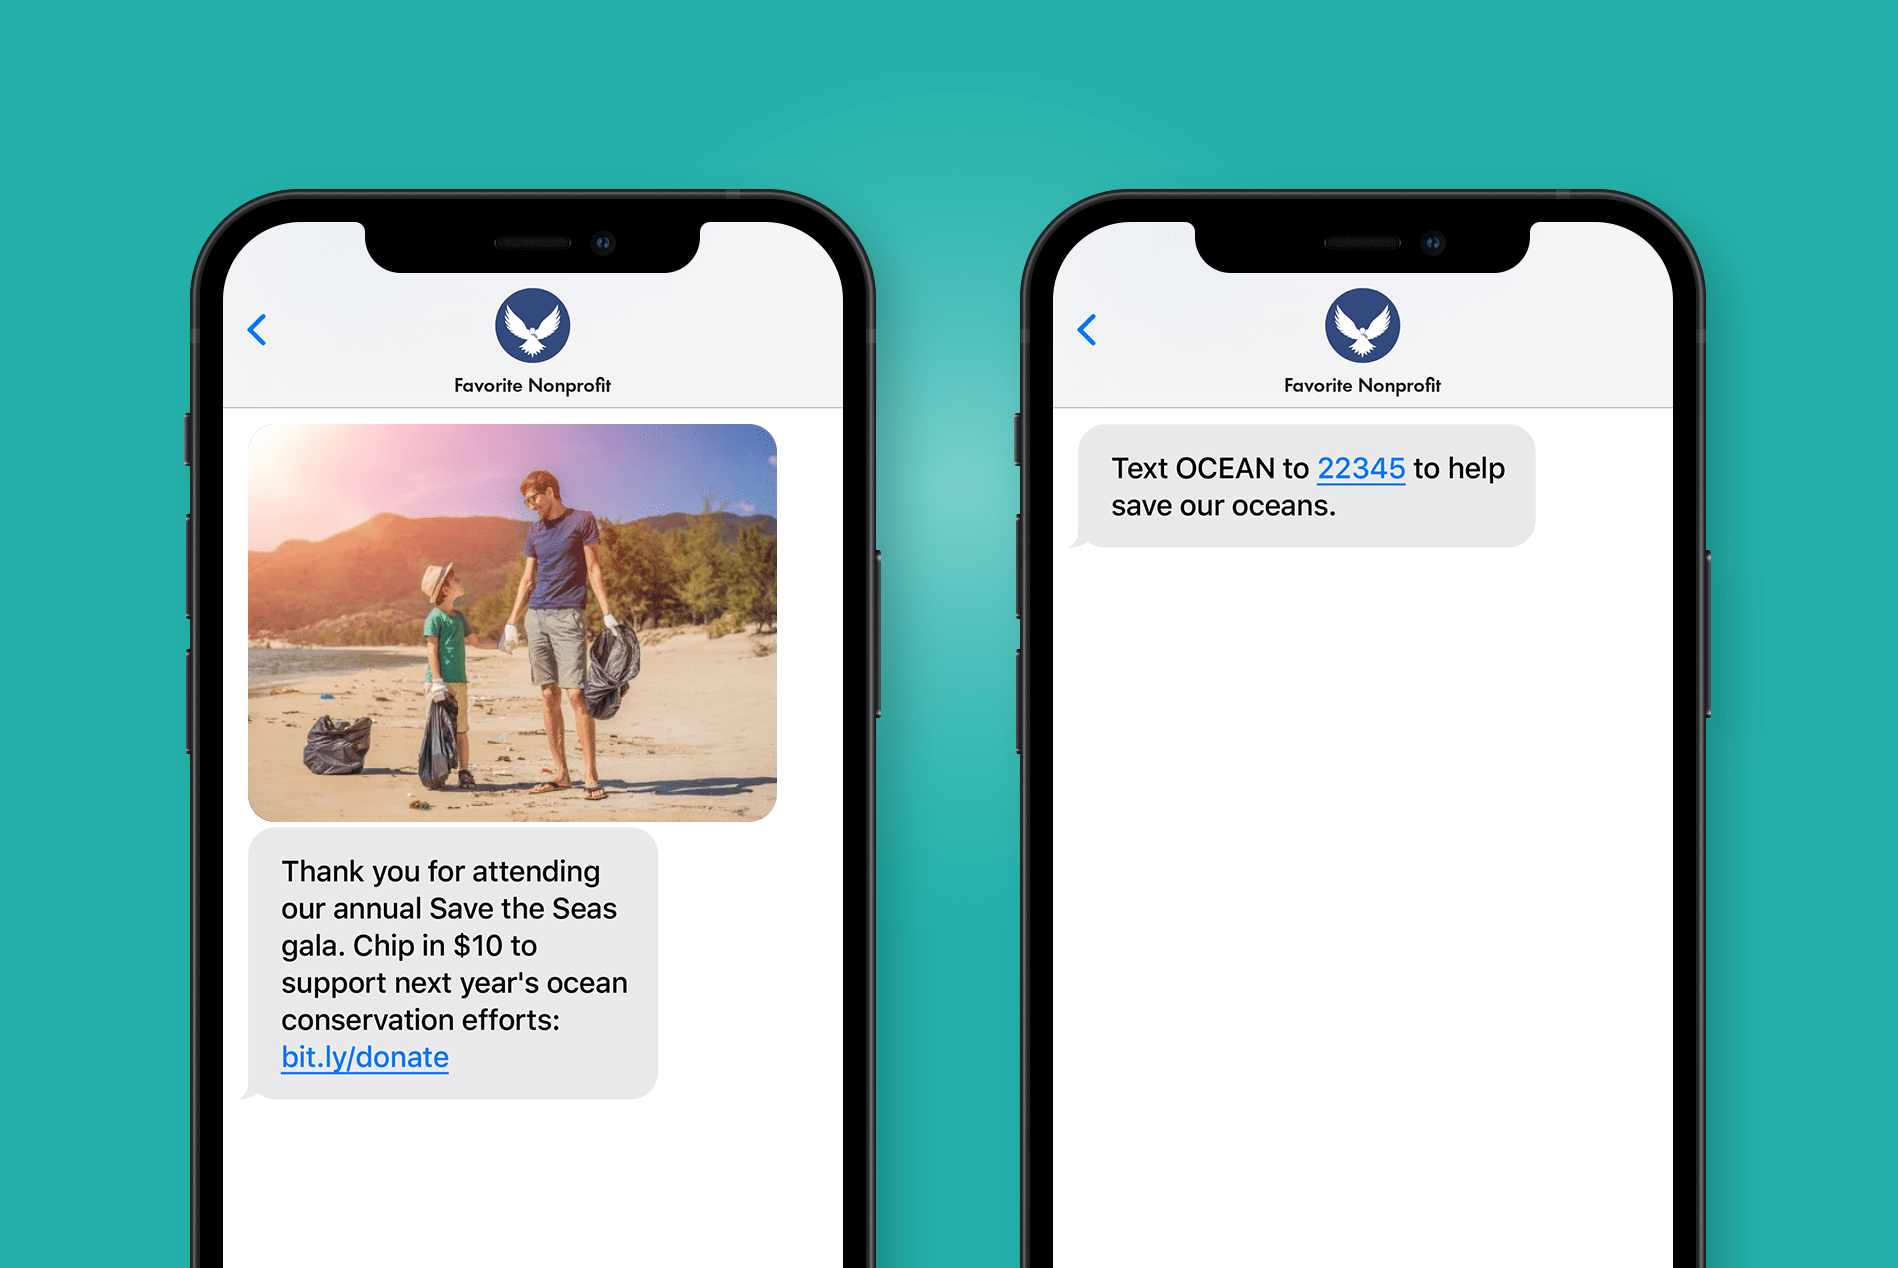 Example of a nonprofit SMS message vs. MMS message with image/gif